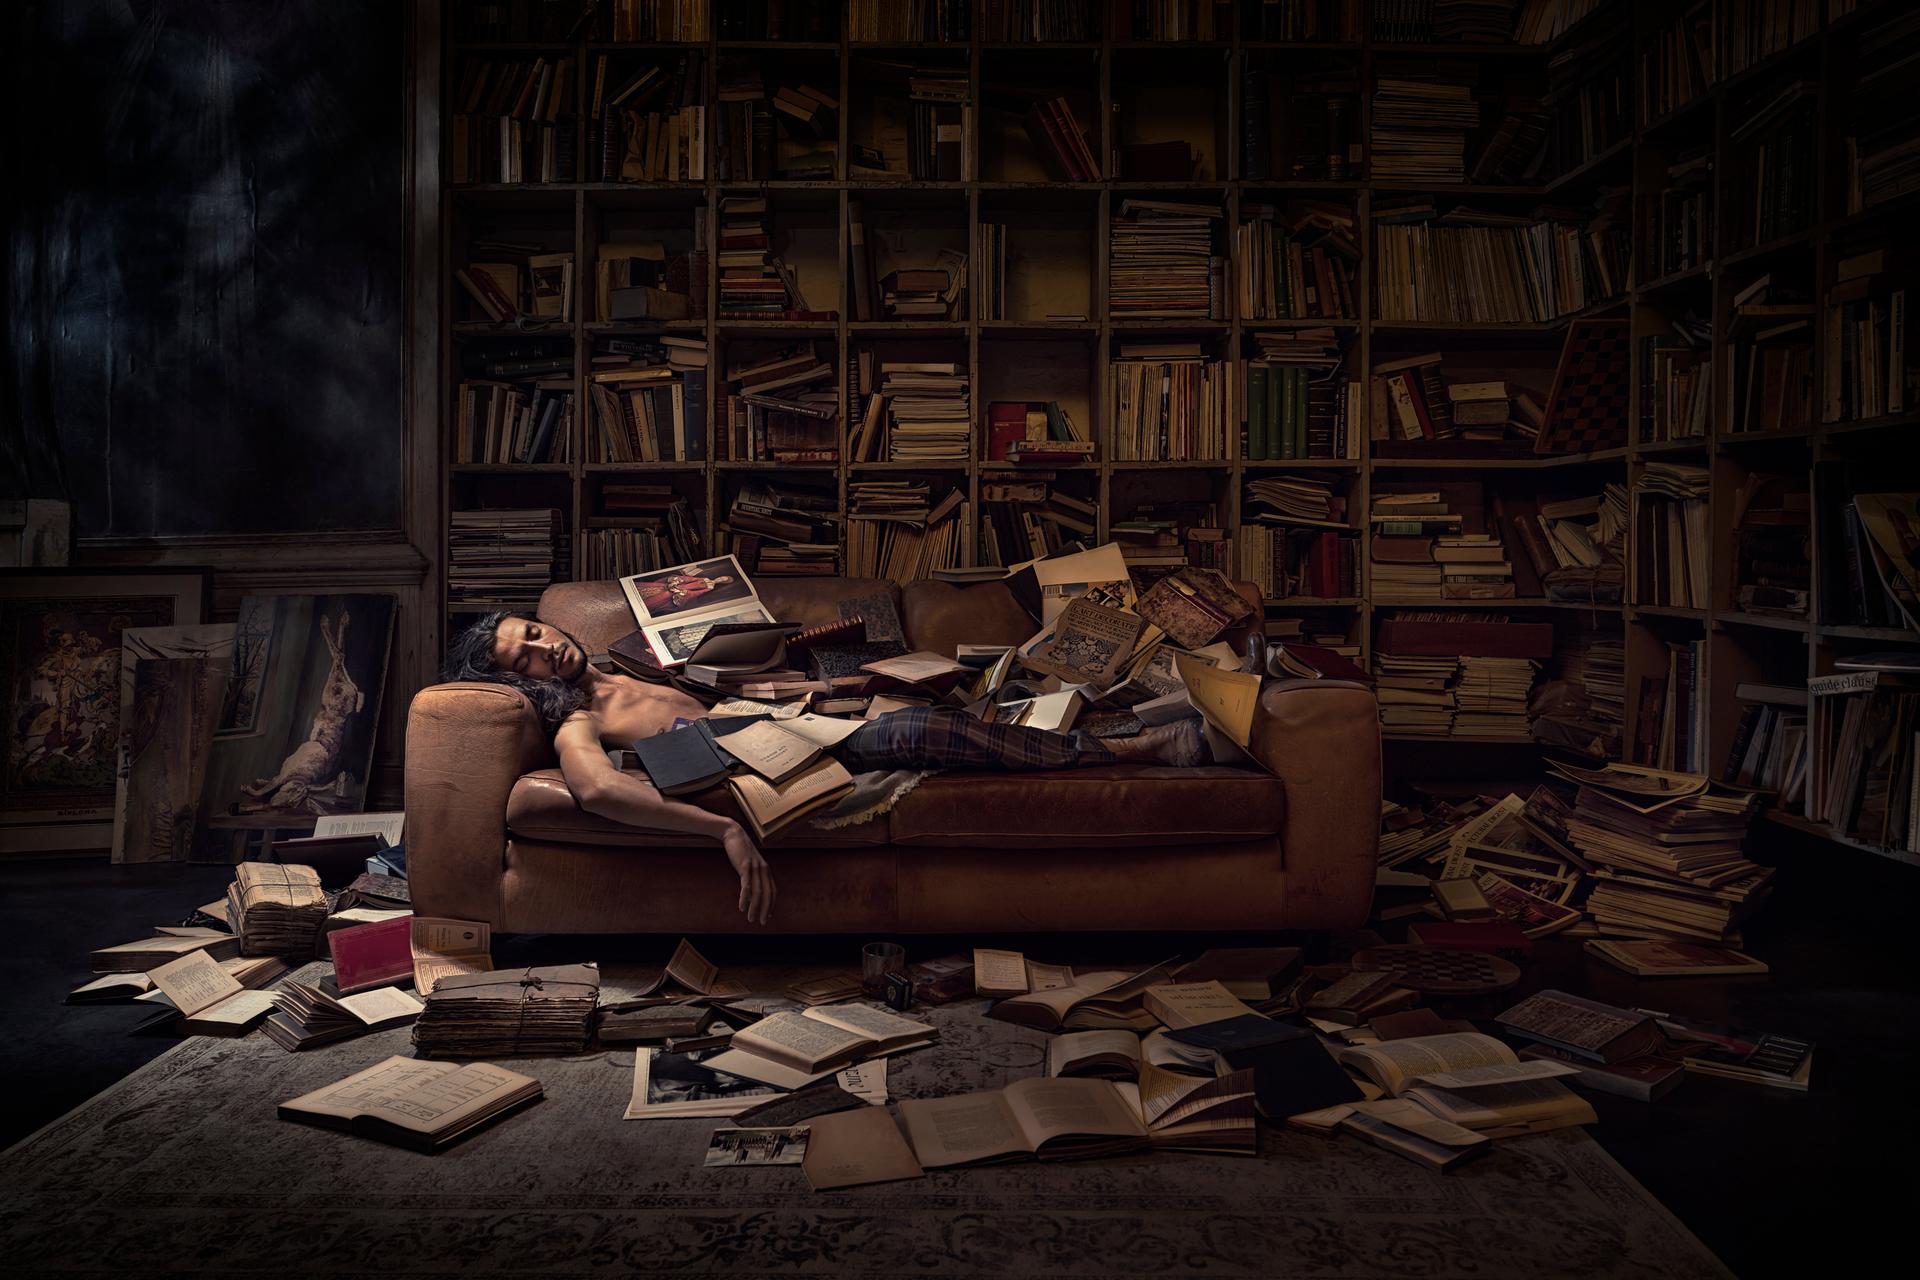 The Bookworm image